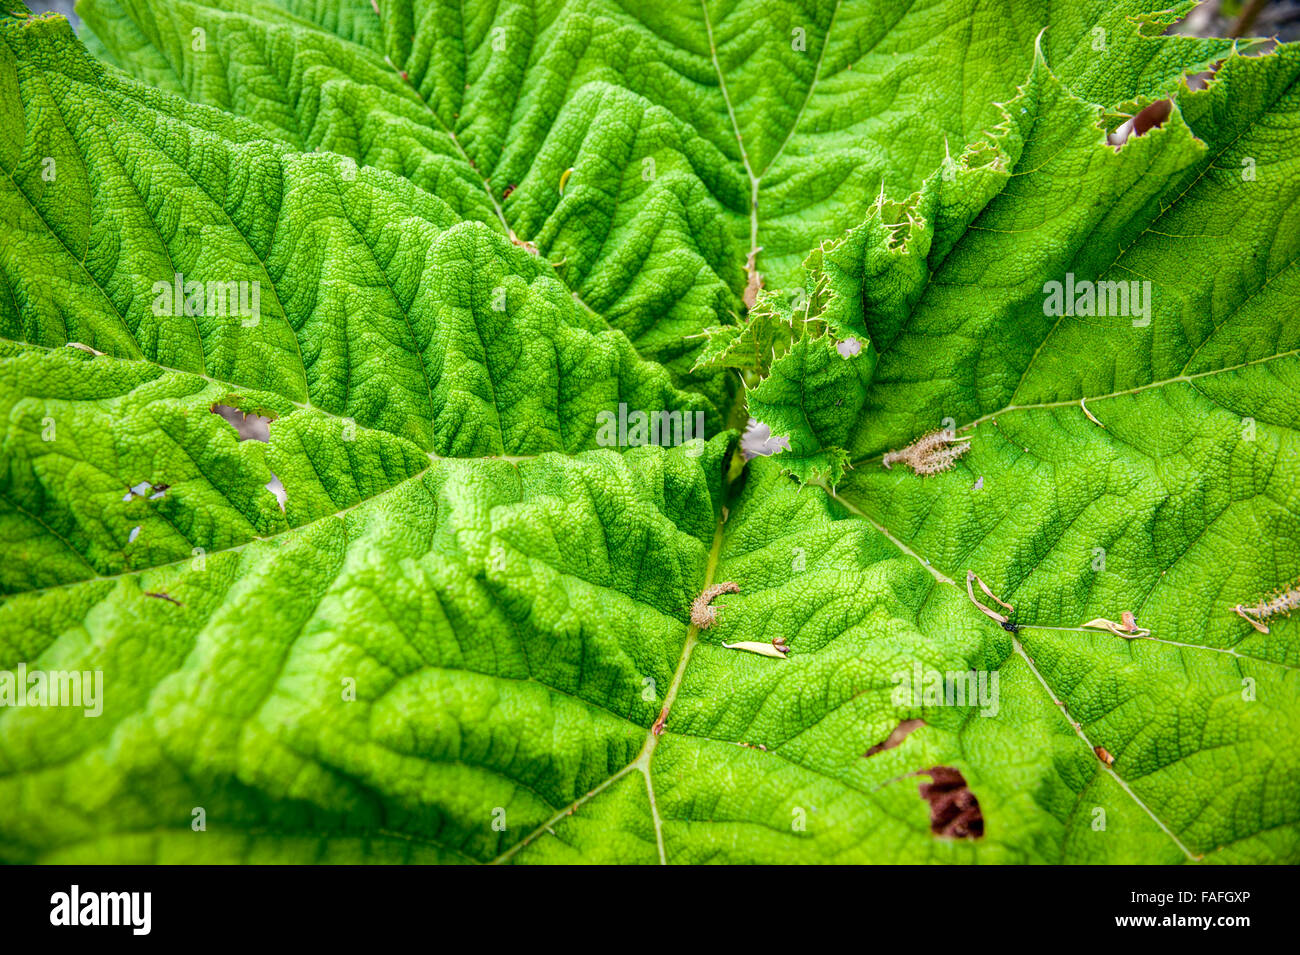 Large Prickly Rhubarb leaf close up Stock Photo